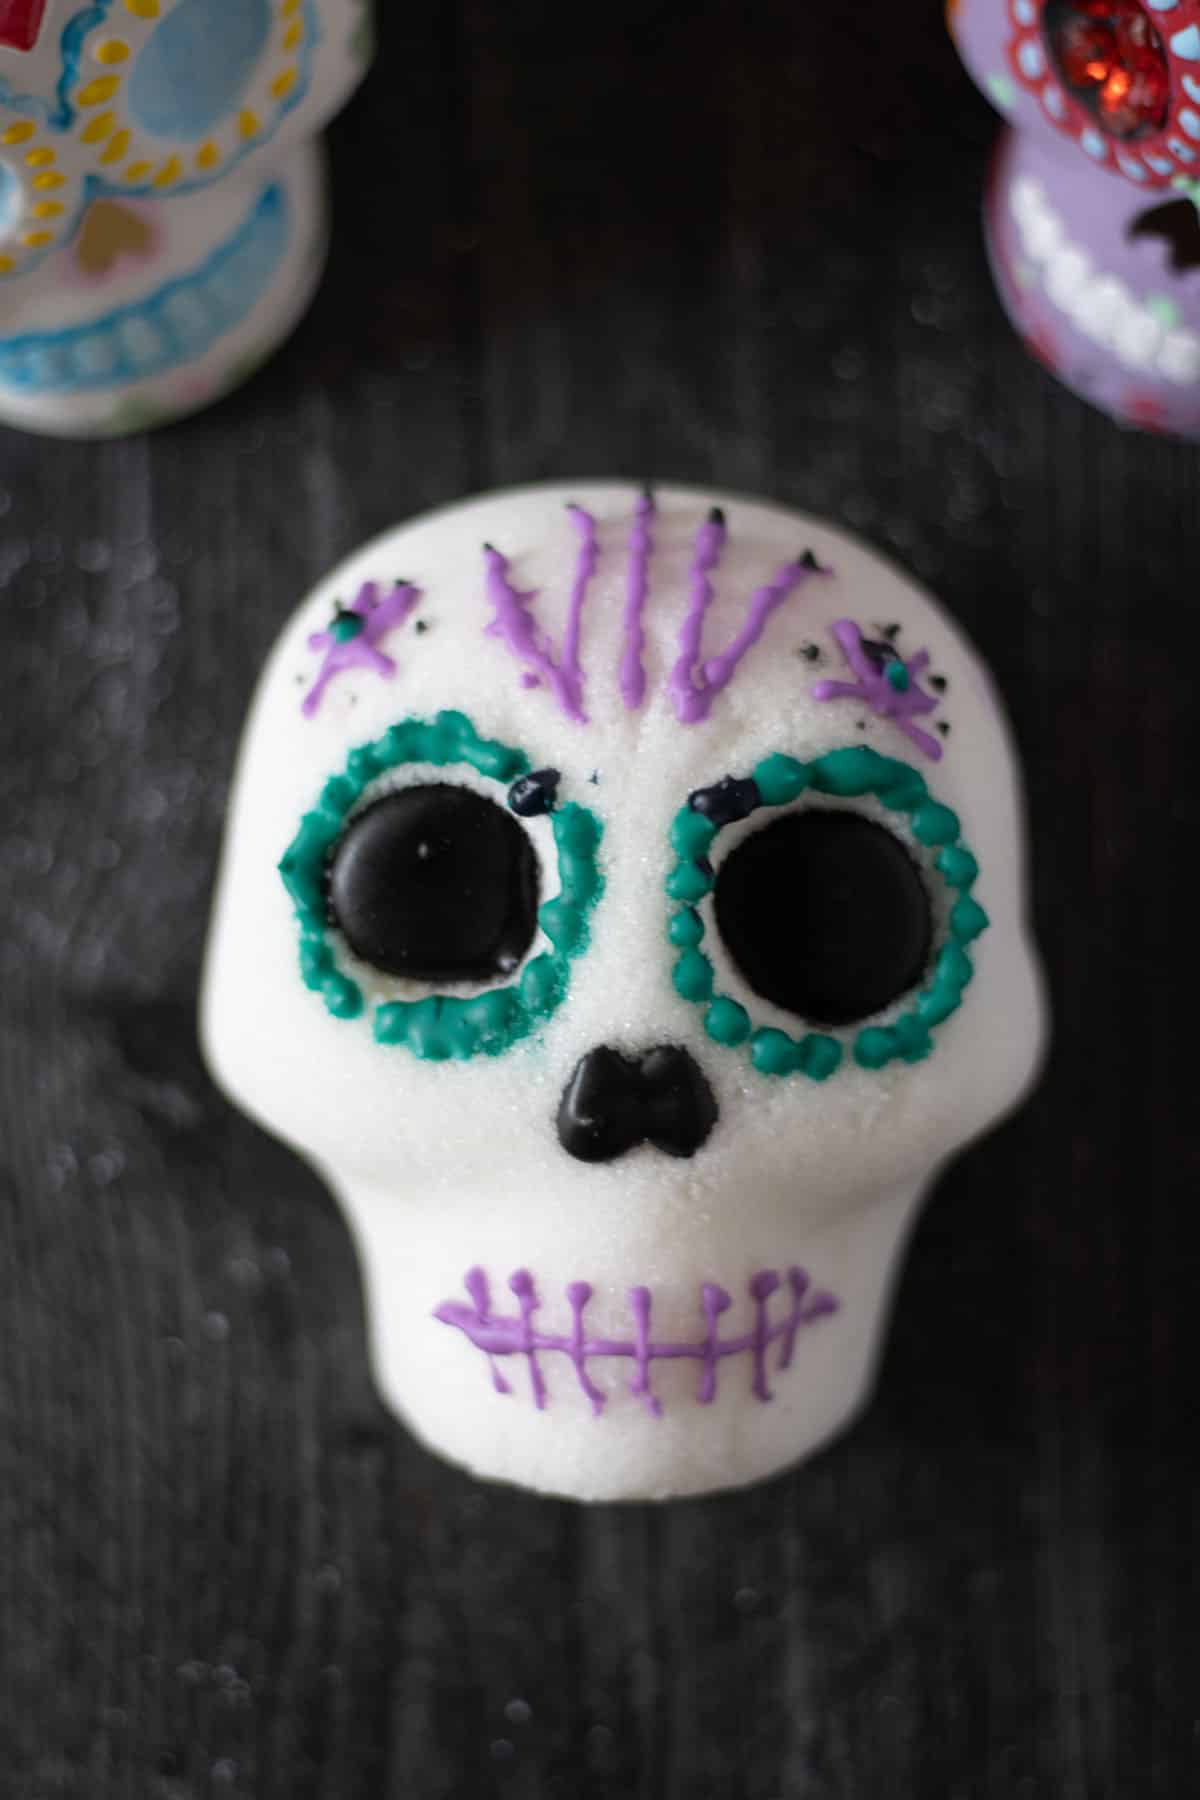 An above view of a decorated sugar skull and two skulls in the background.